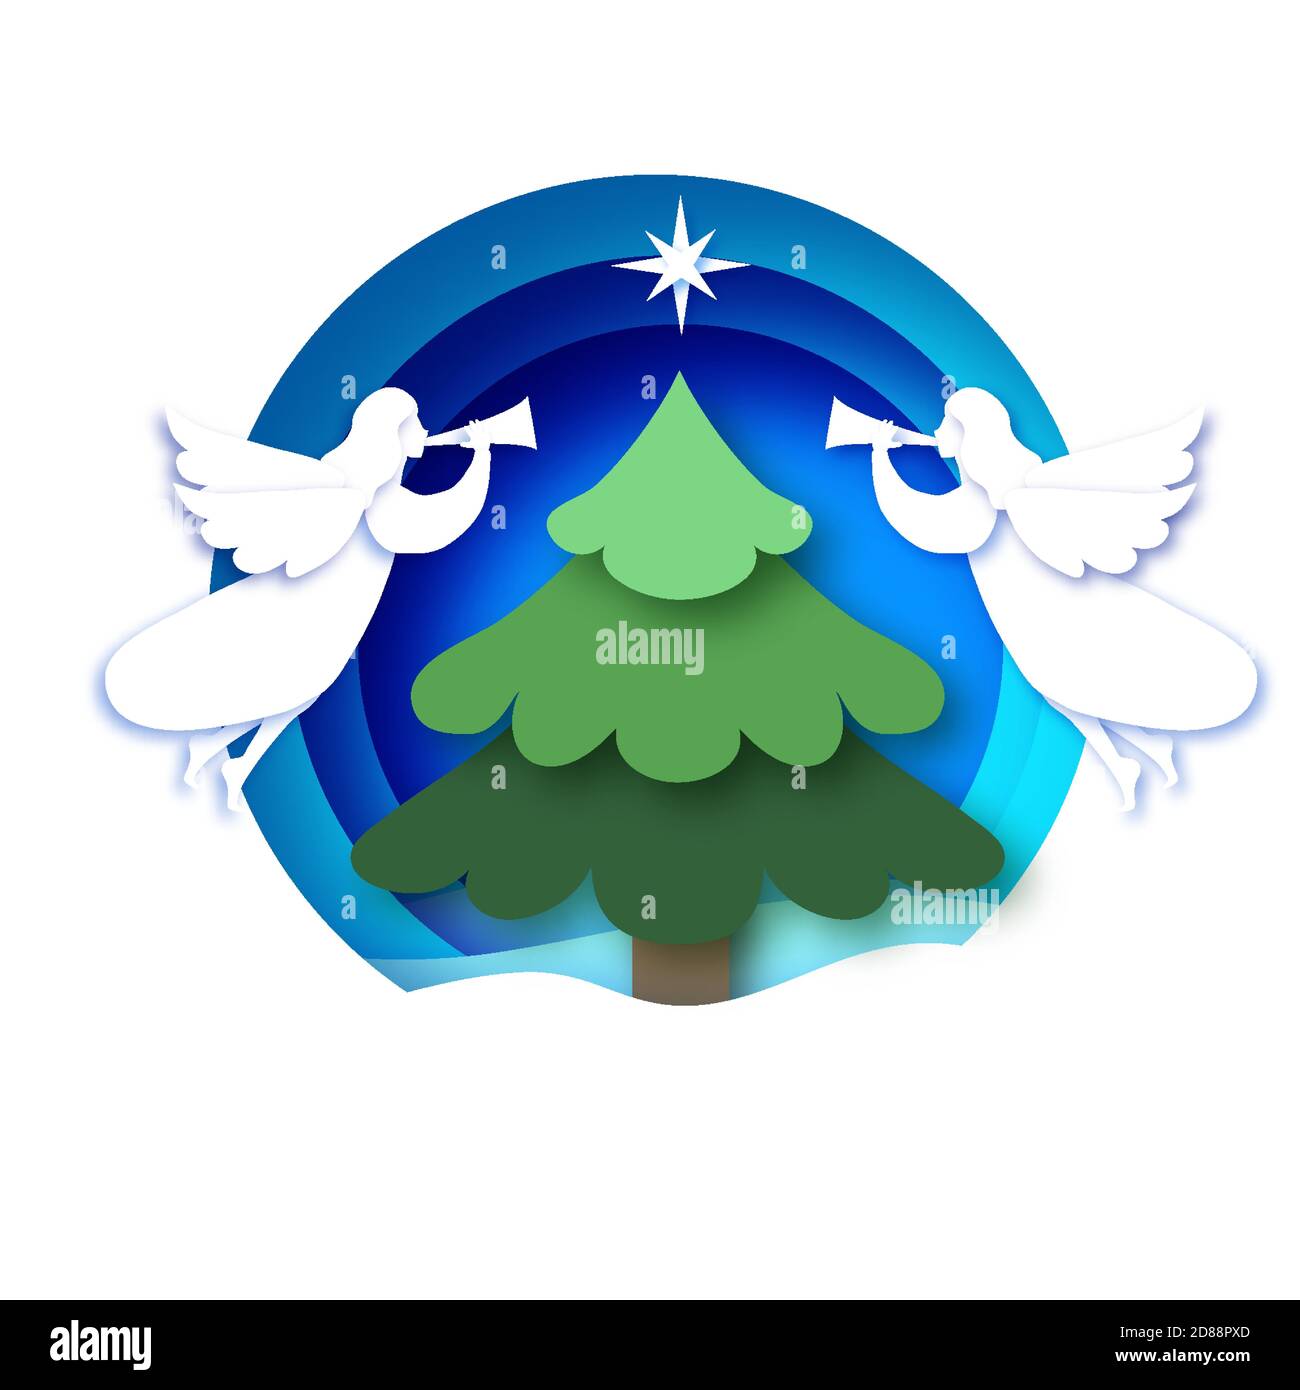 Merry Christmas Greetings Card with white Angels and Green Christmas tree. Winter holidays. Happy New Year. Circle bauble frame in paper cut style. Stock Vector